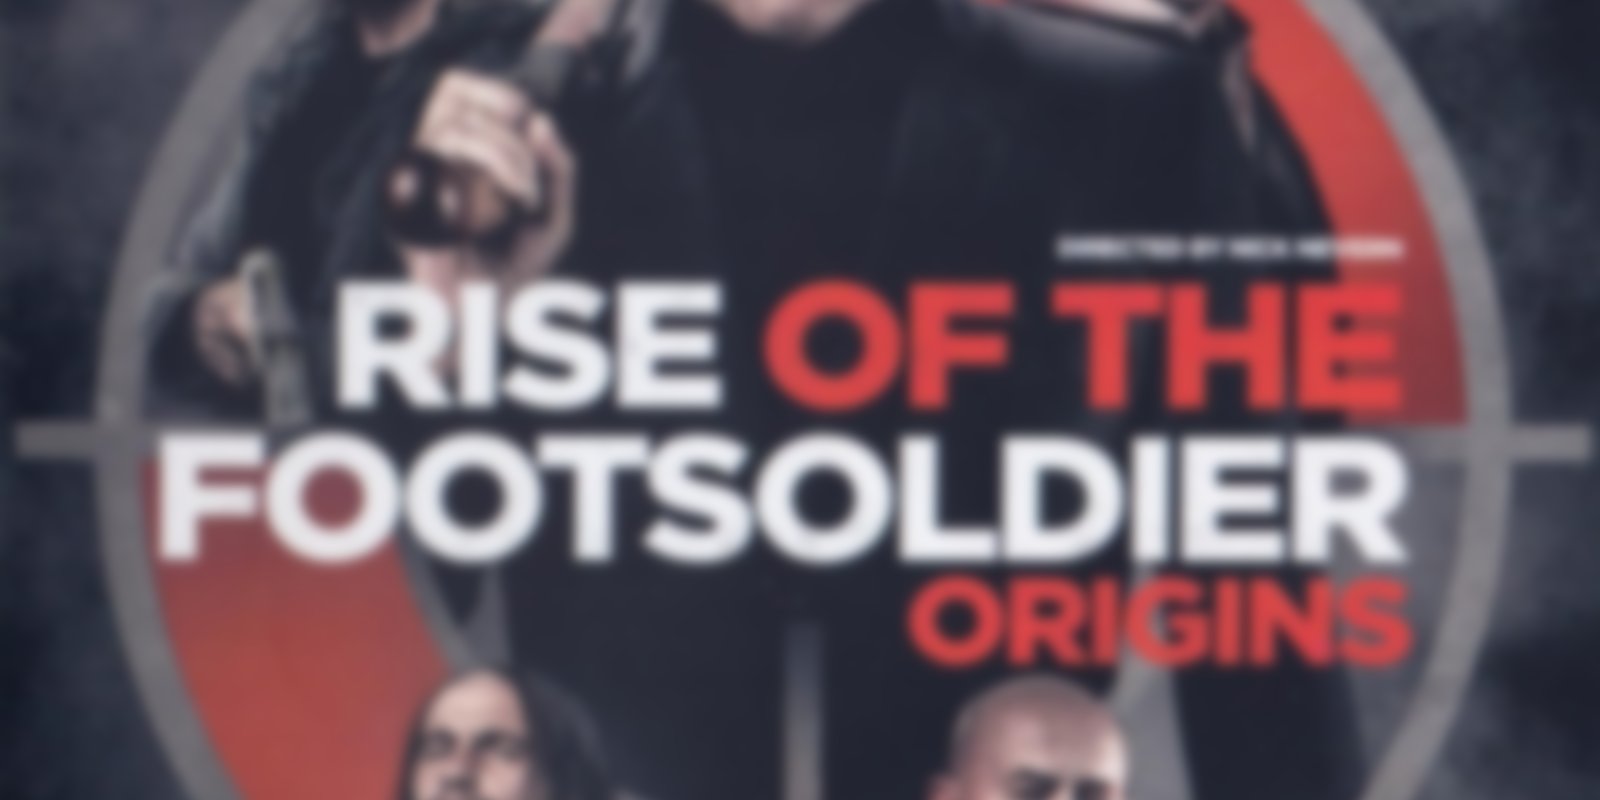 Rise of the Footsoldier - Origins